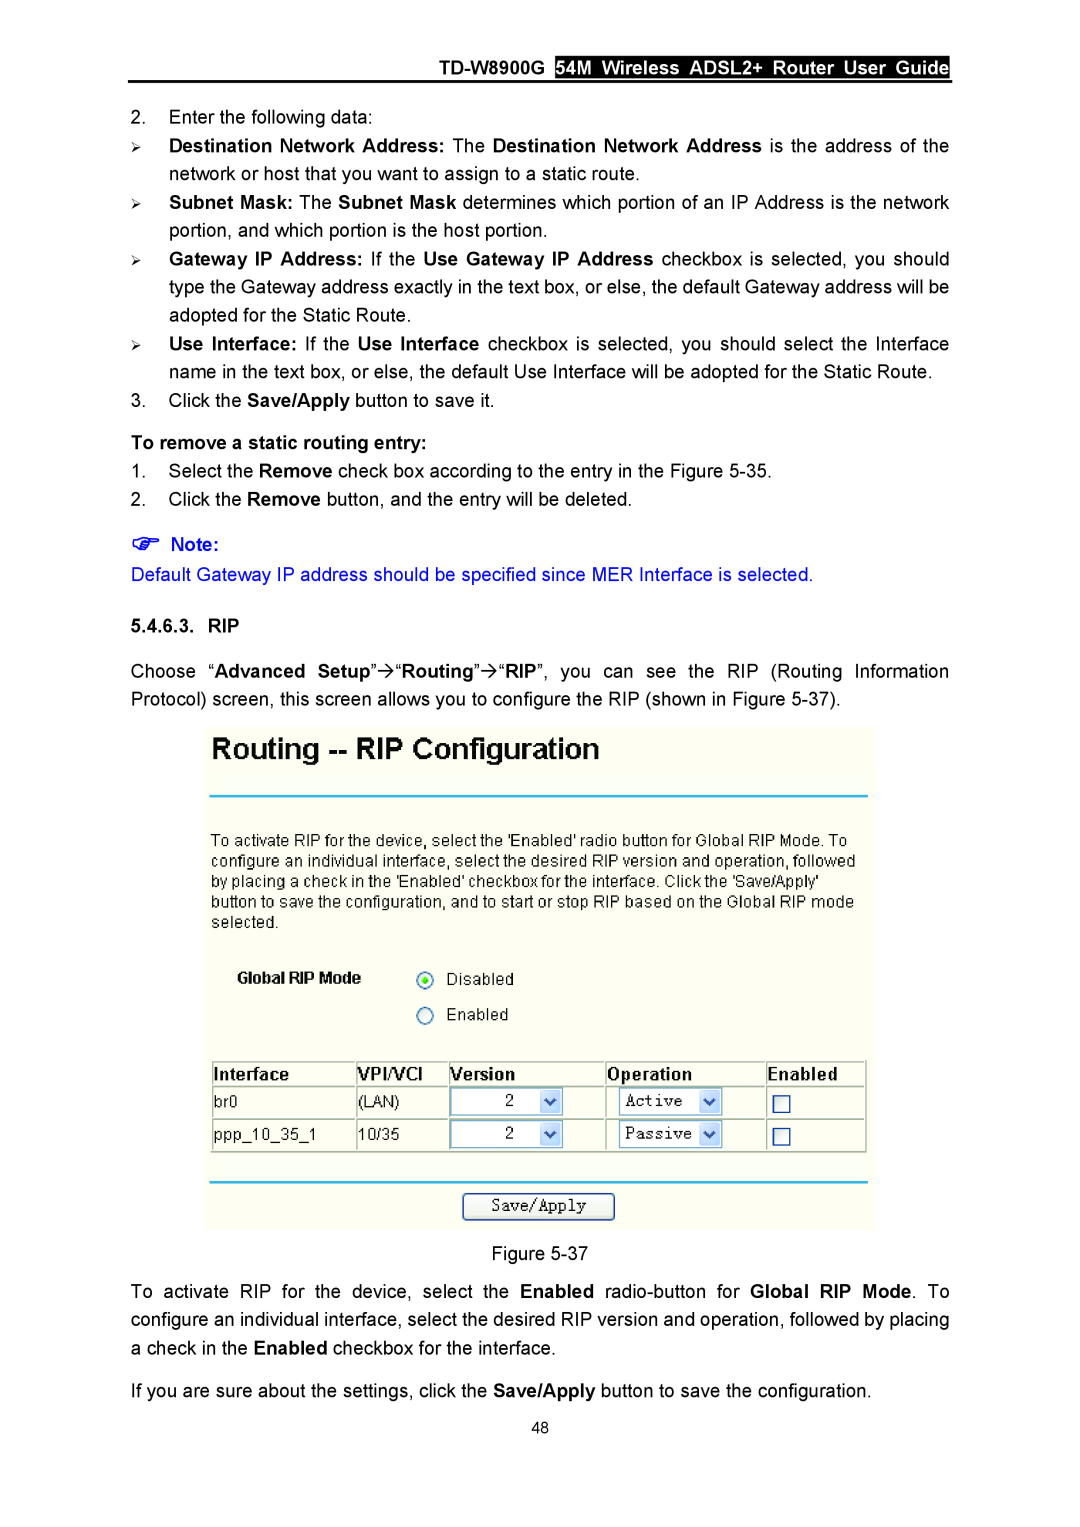 TP-Link manual TD-W8900G 54M Wireless ADSL2+ Router User Guide, To remove a static routing entry, Rip 